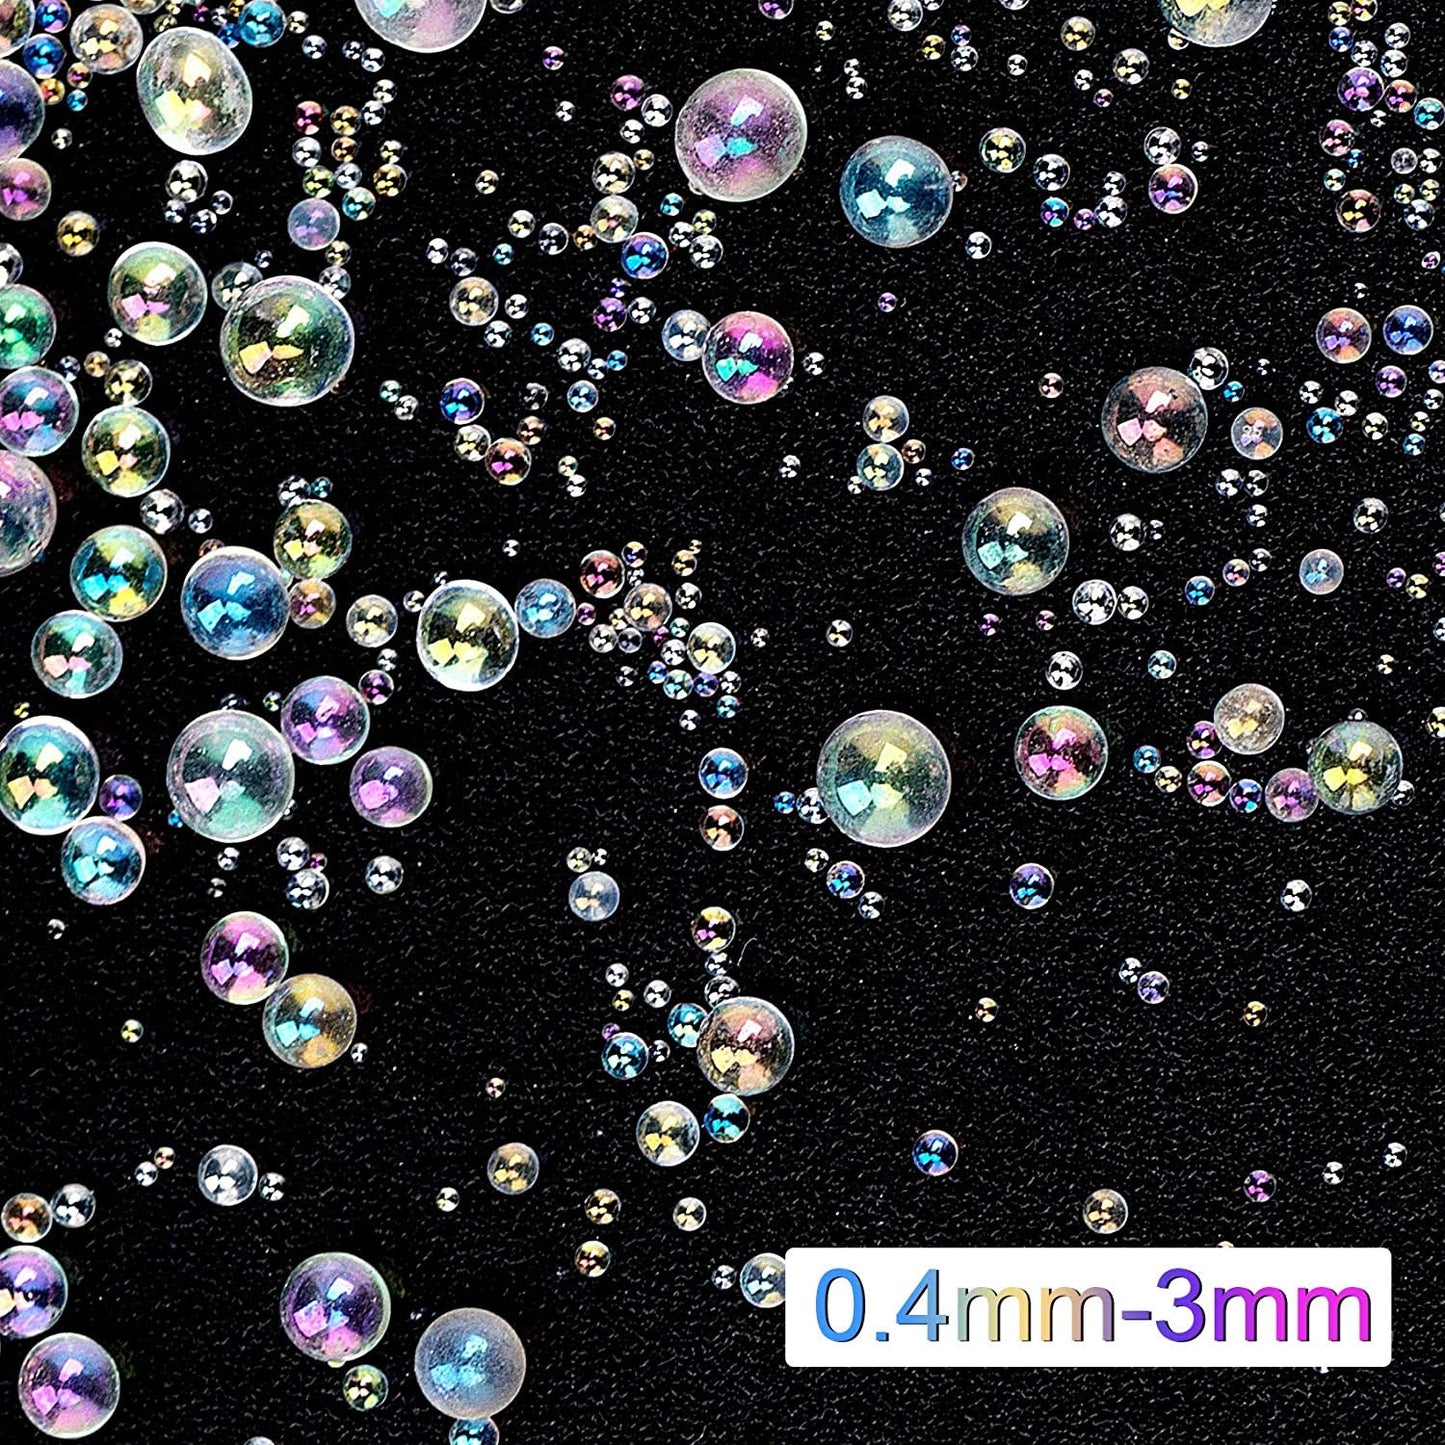 Colorful Baubles for Resin, Nails, Makeup, Candles and Crafts - Bubble beads 0.4-3mm mixed size